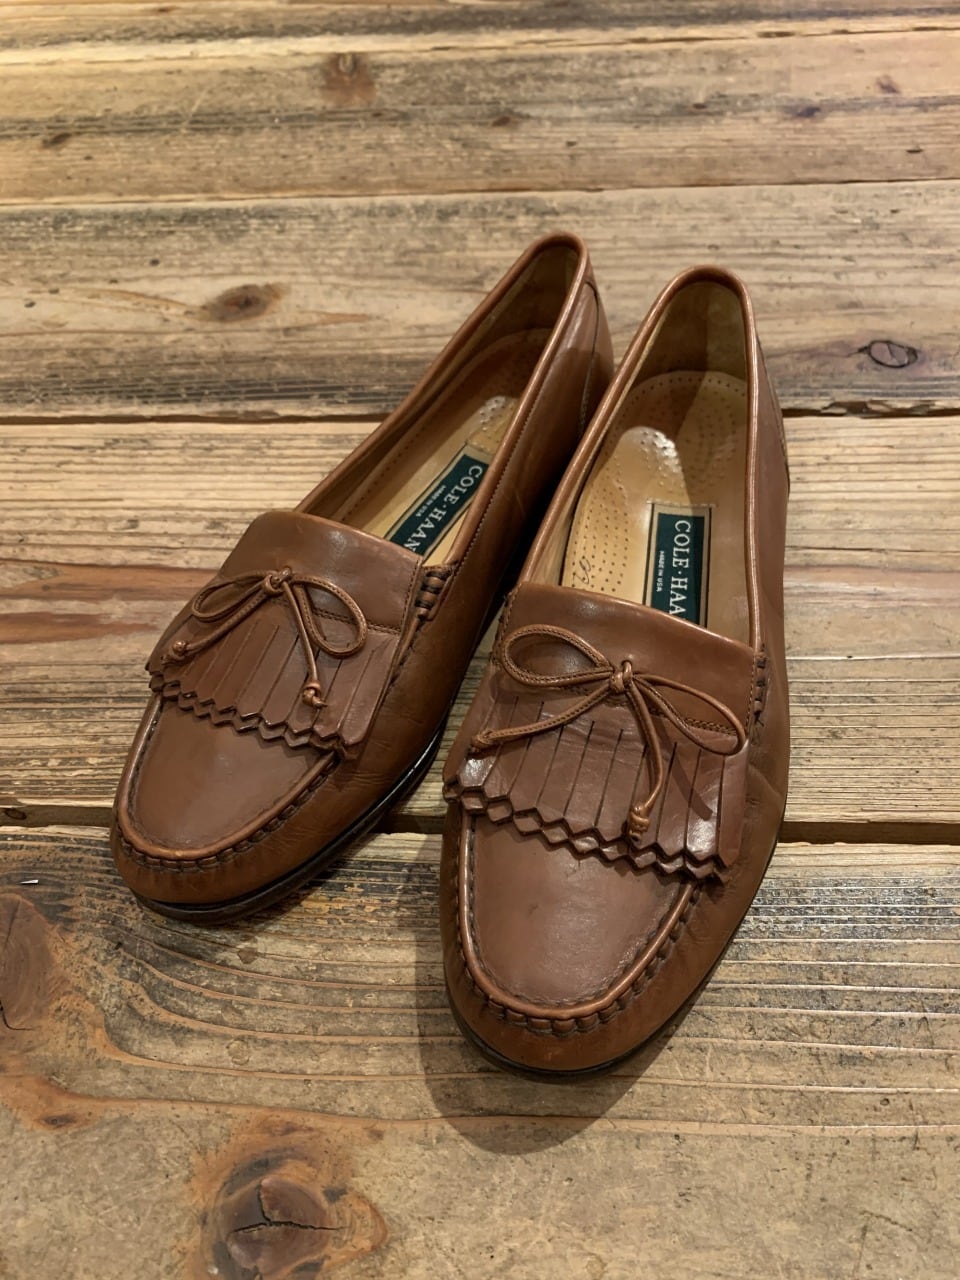 Leather Tassel Loafers "COLE-HAAN"